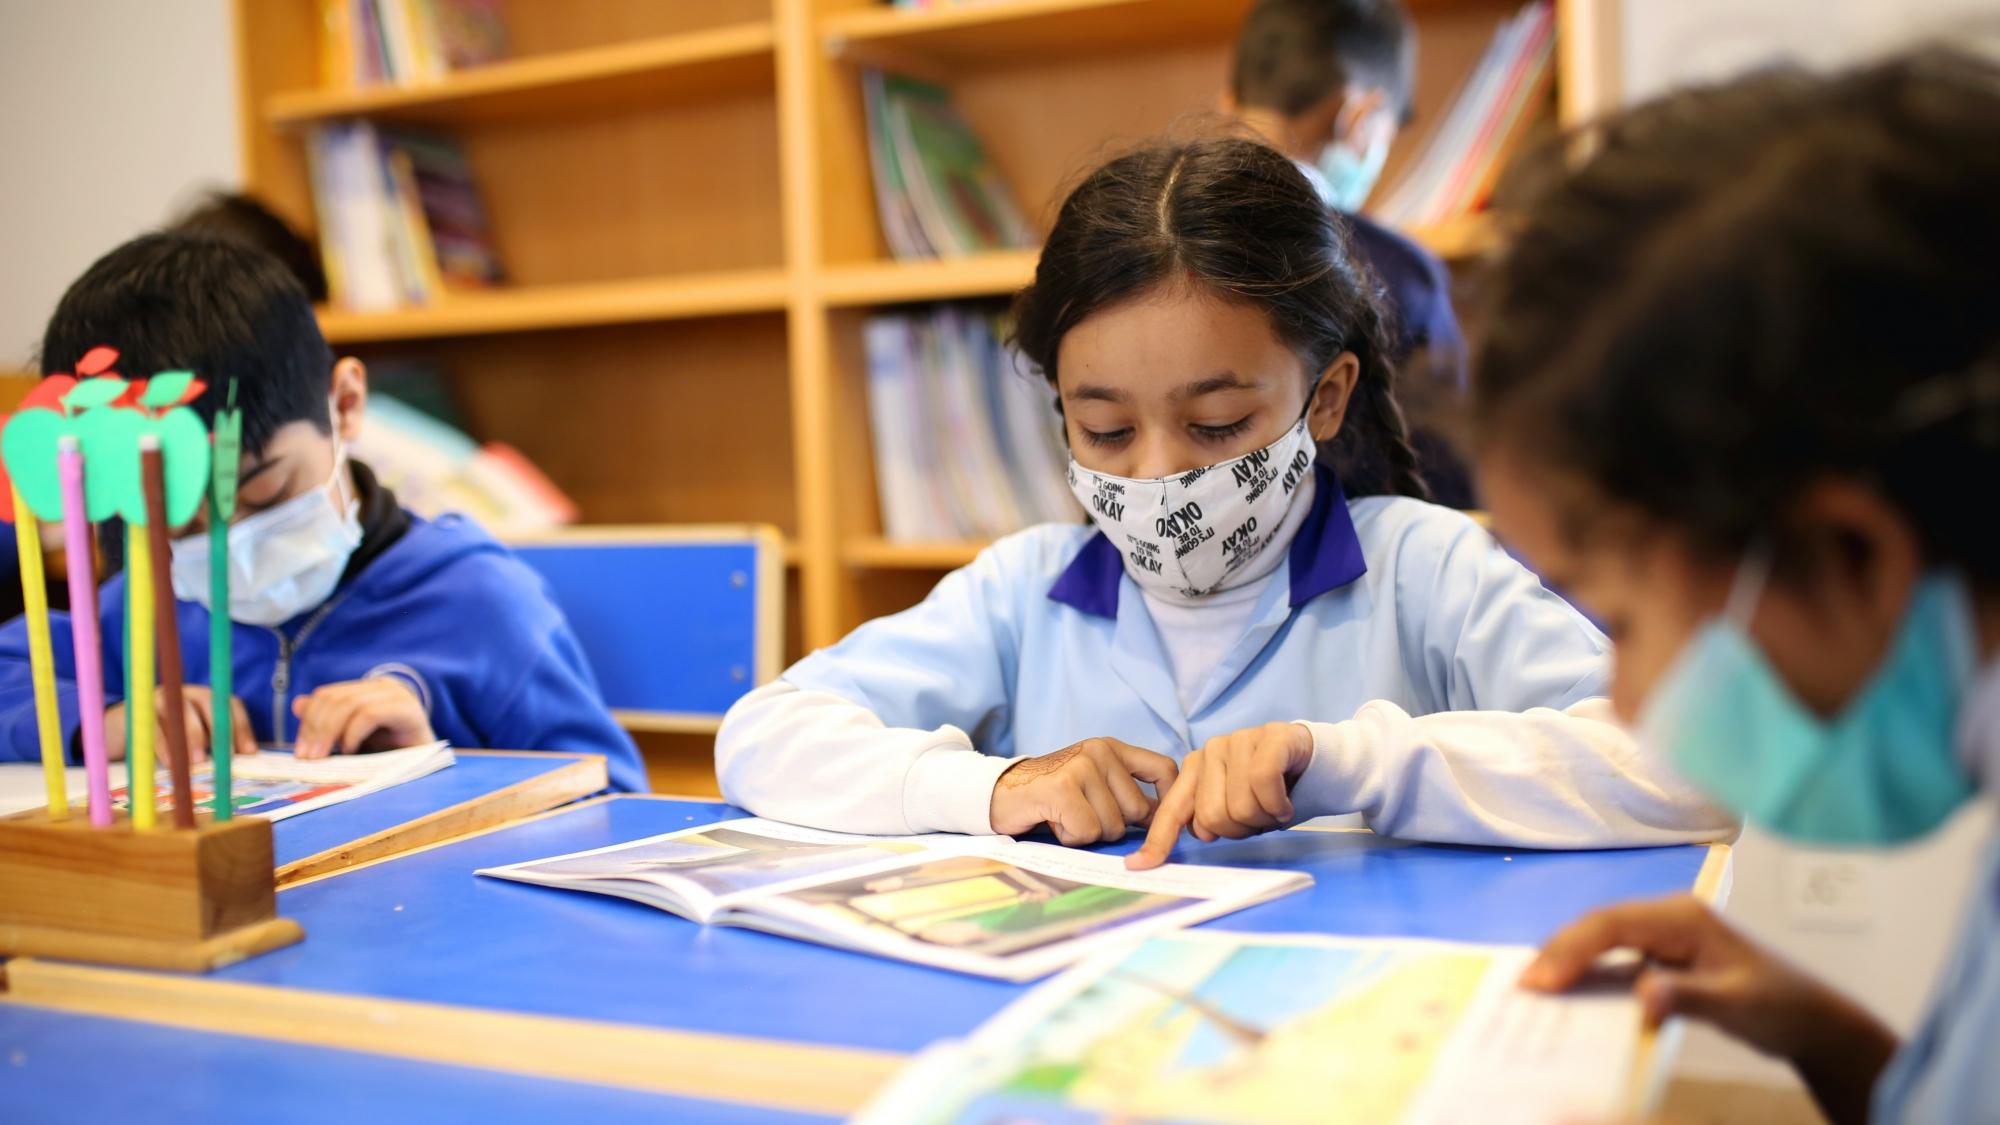 Children wearing face masks and reading books in school